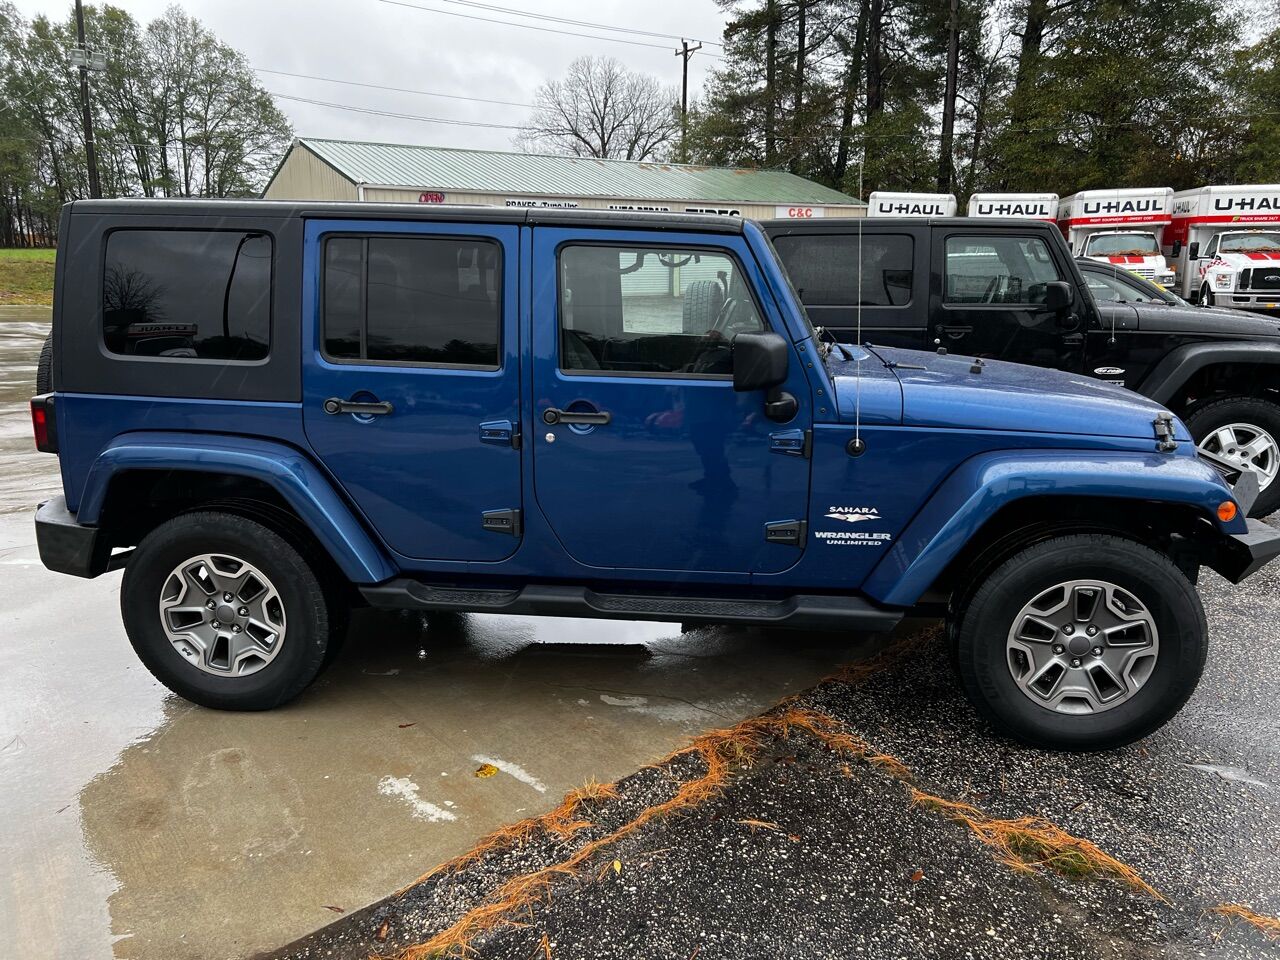 2009 Jeep Wrangler Unlimited For Sale In Greer, SC ®